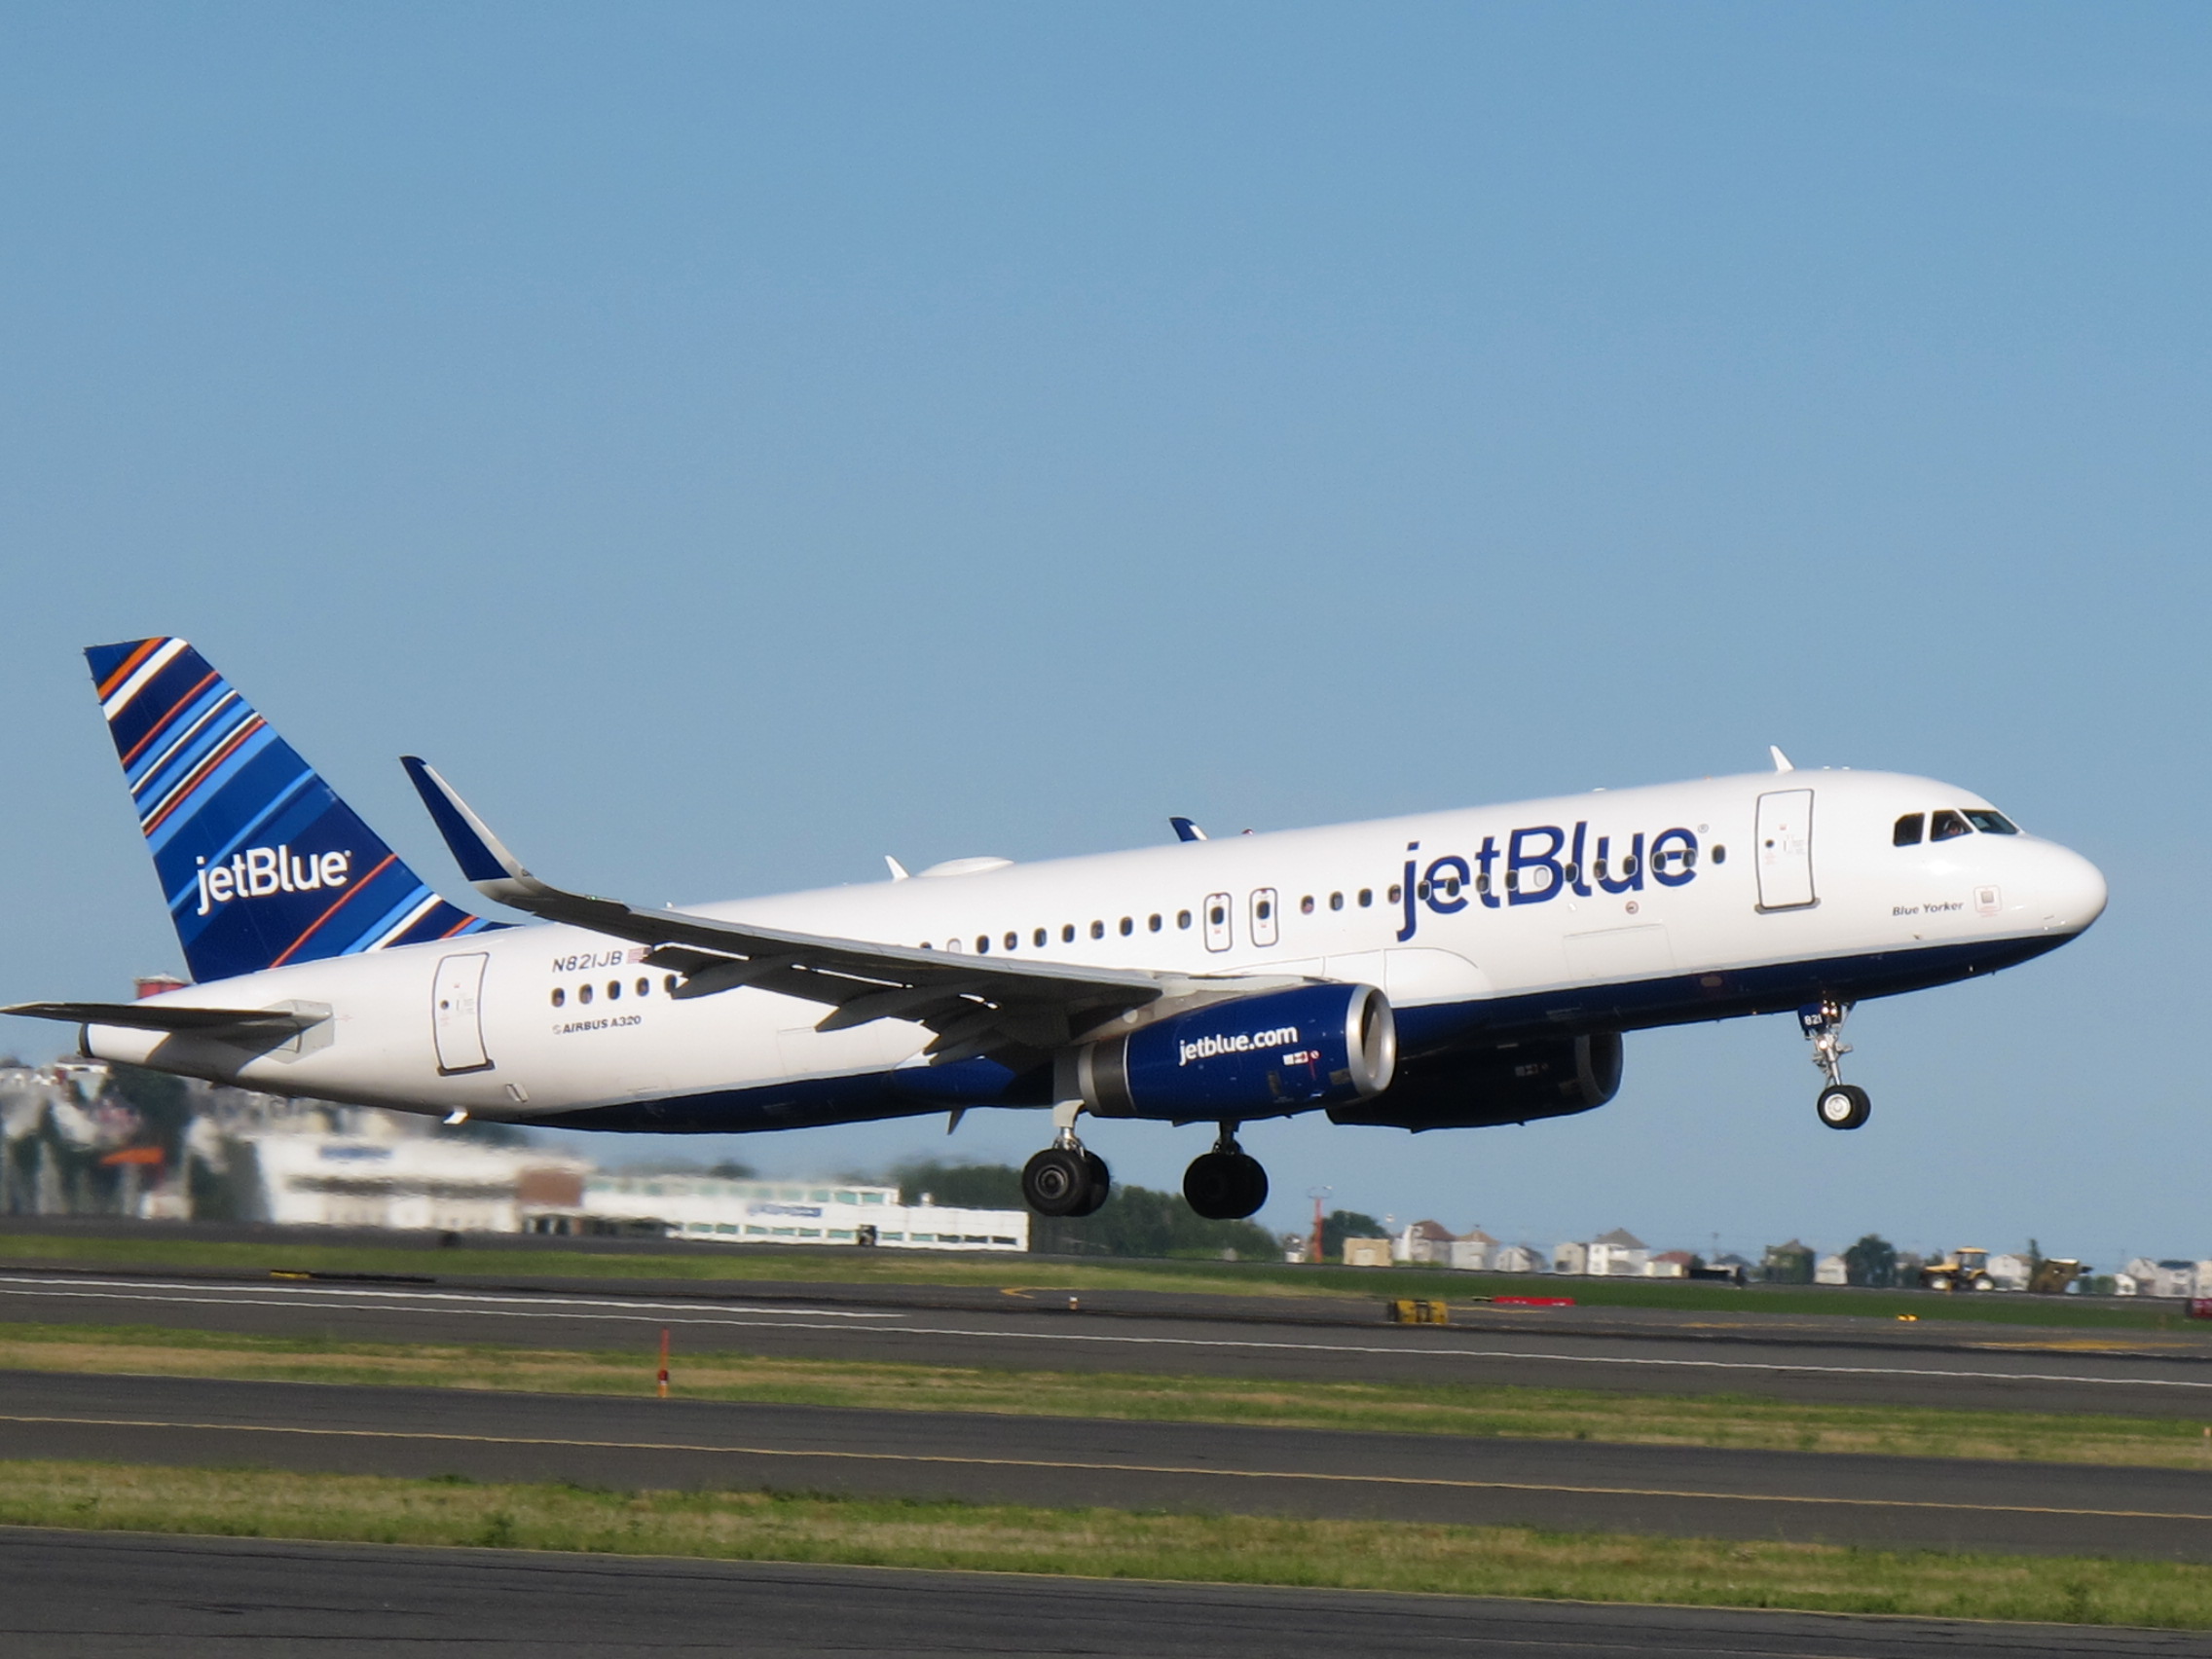 JetBlue Has One-Way Flights For $39 This Fall